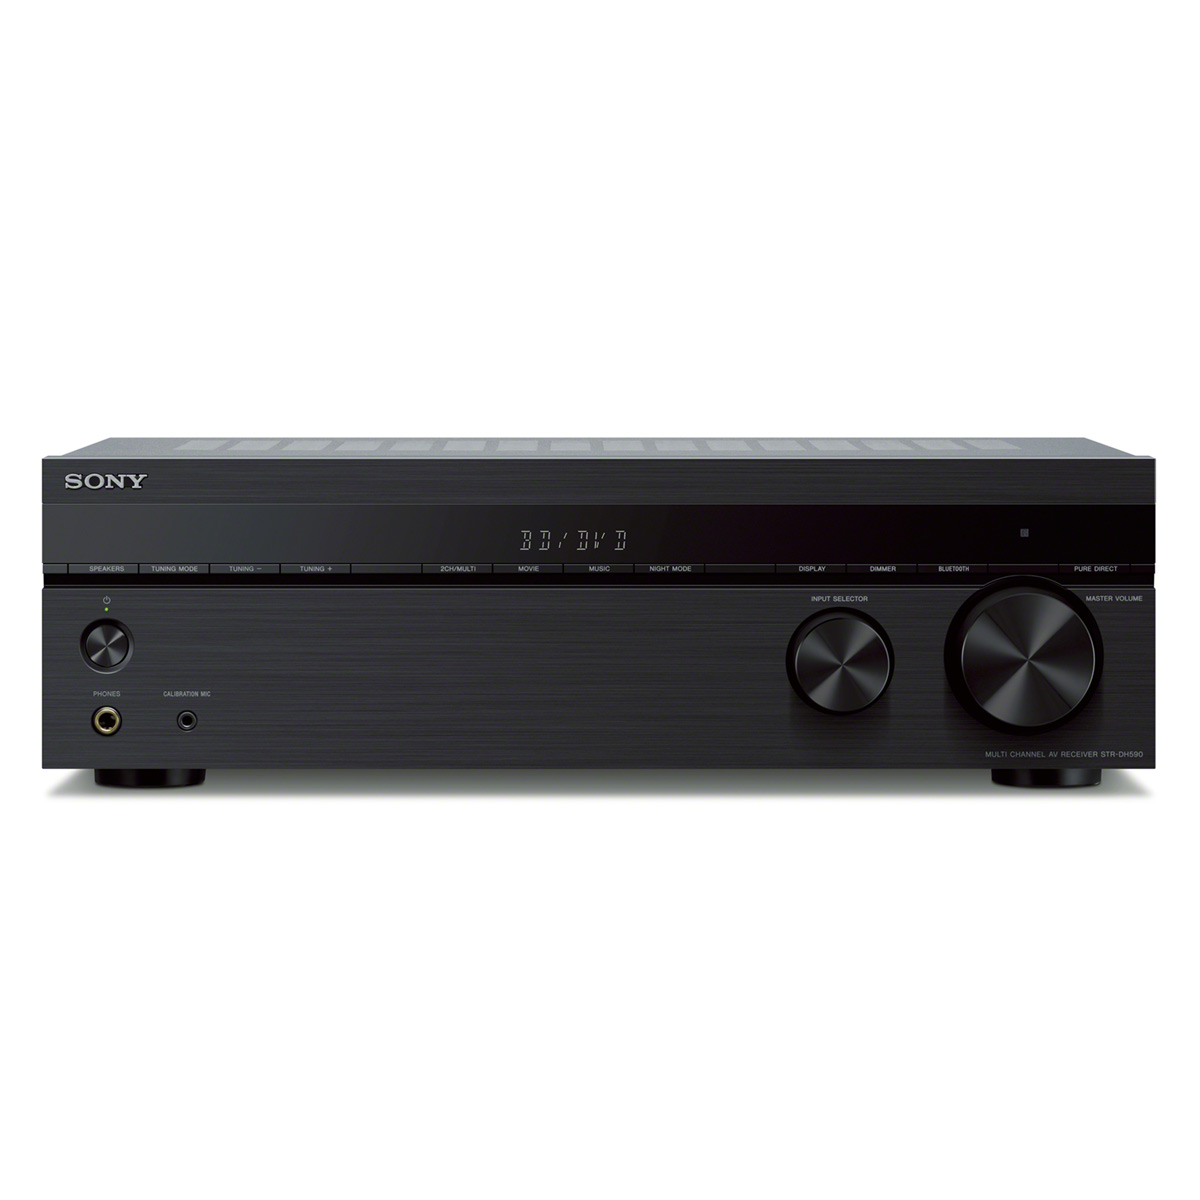 Sony STR-DH590 5.2 Multi-Channel 4K HDR AV Receiver with Bluetooth - image 1 of 4